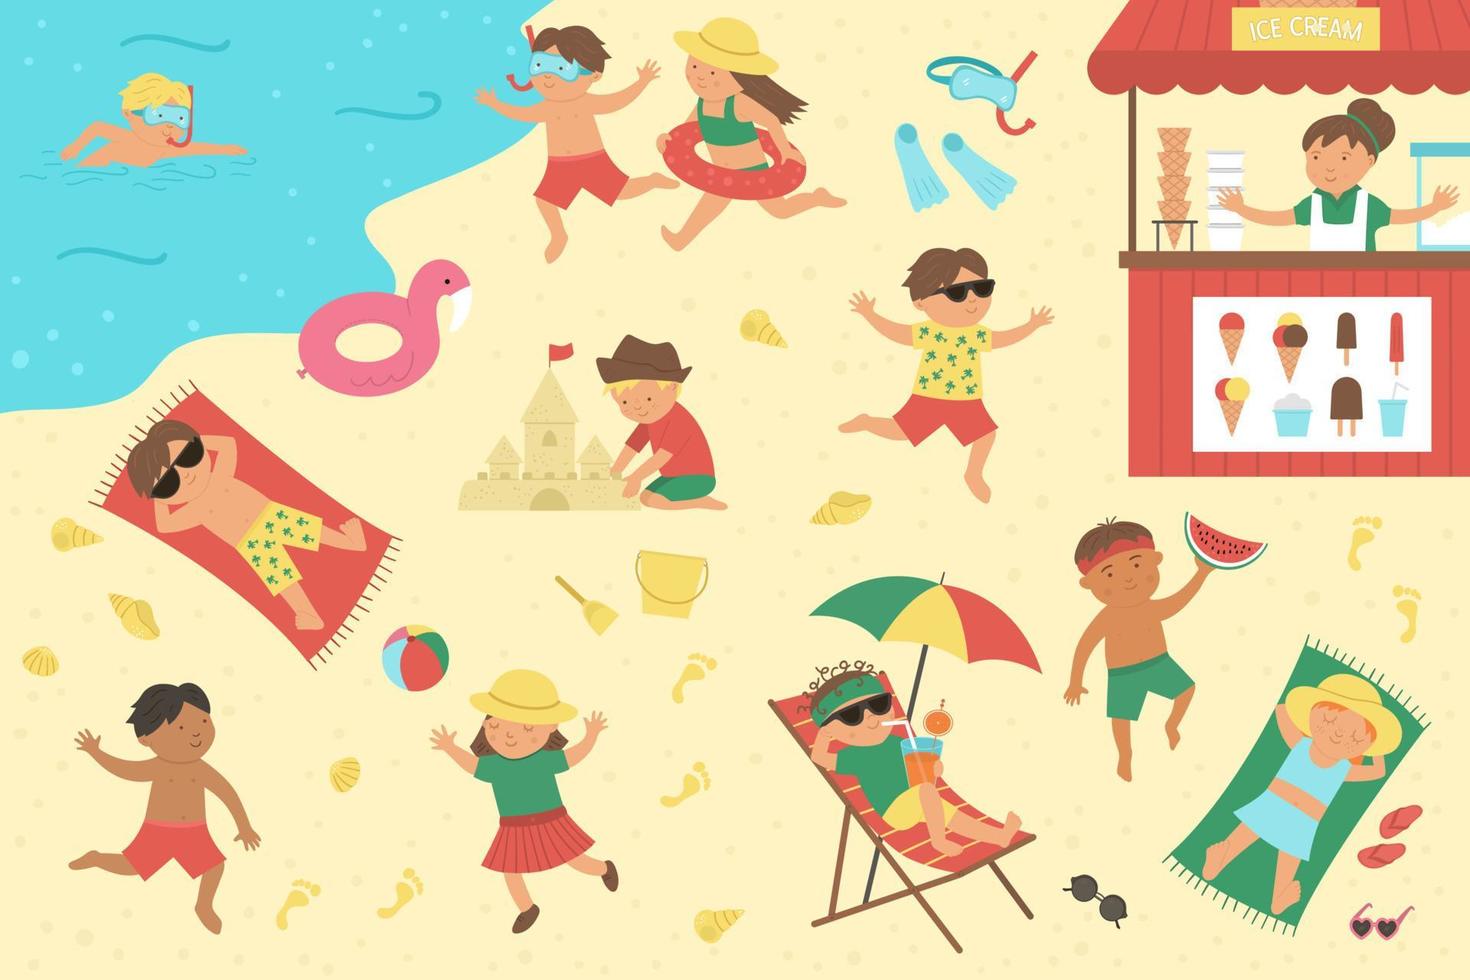 Vector scene with children playing on the beach and doing summer activities. Cute girls and boys swimming, playing ball, constructing sandcastle and lying in the sun. Fun summer illustration